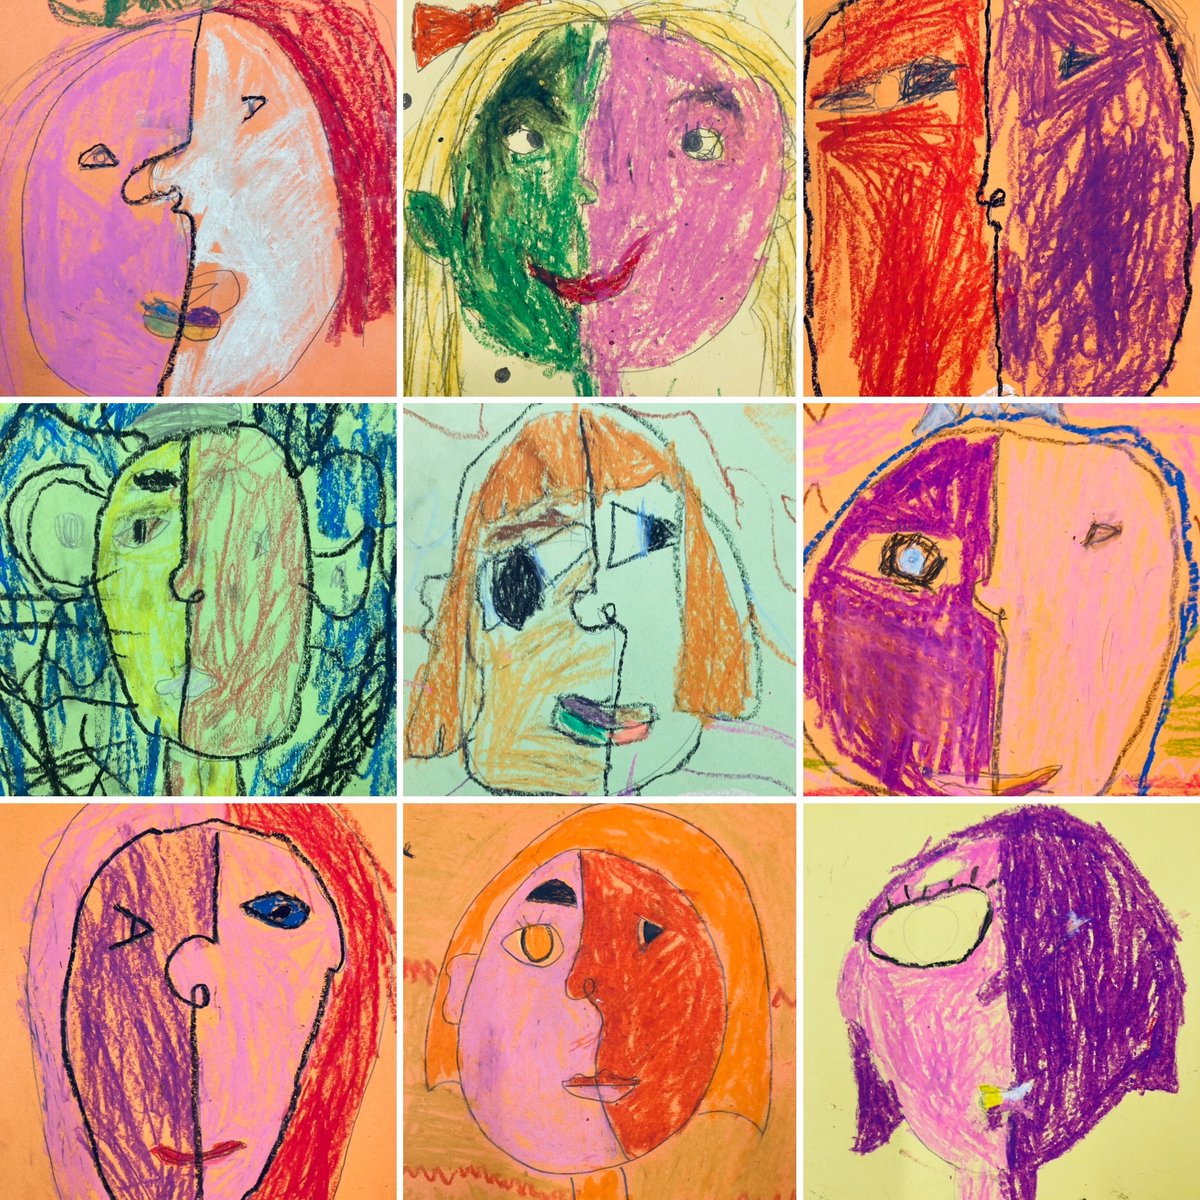 Pastel Picasso Portraits 🖼 year 1 did a super job of their #pablopicasso inspired portraits 
#picasso 
#picassoinspired 
#wow
#creativity 
#littleartists 
#artlesson 
#artroom
#colourfulwork